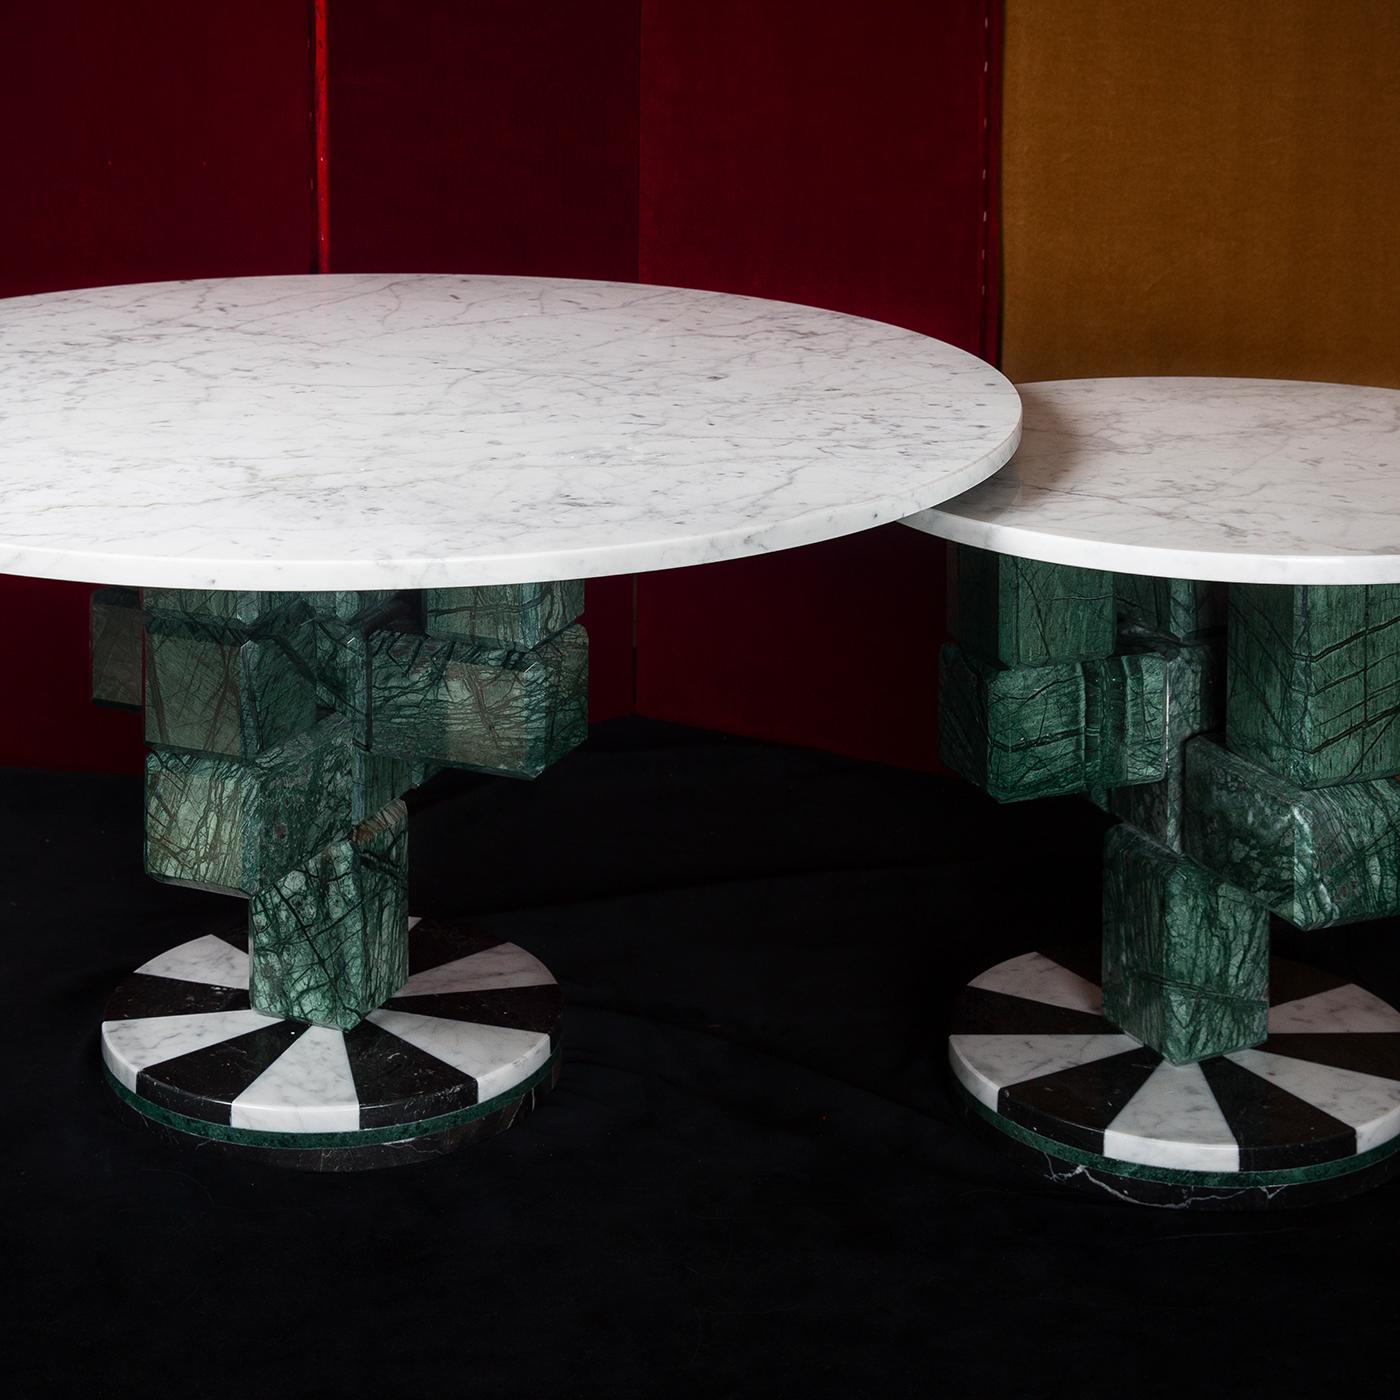 The unique design of this small coffee table will make a statement in a modern or eclectic interior, where it can be combined with other pieces in the same Caxus limited series. Resting on a striking round base of black and white marble, the stem is